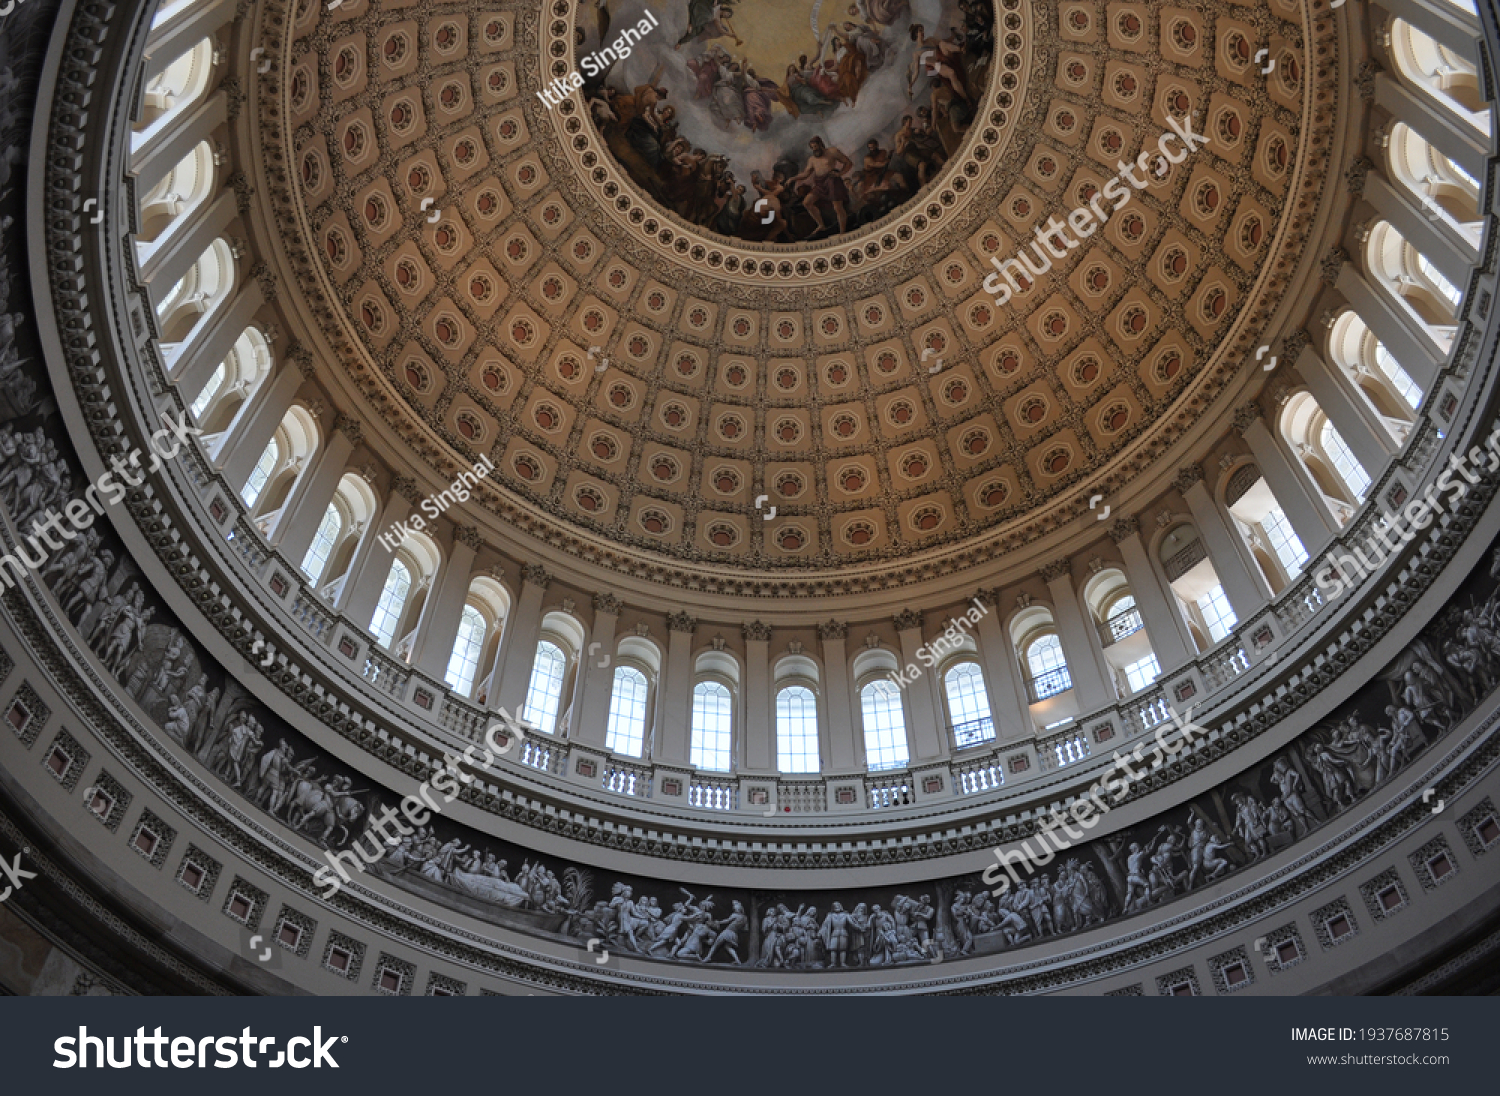 
Dome of US Capitol hill situated above the rotunda of the building. Apotheosis of Washington is a fresco Constantino Brumidi. Dome has beautiful architecture and sculptures as well. #1937687815